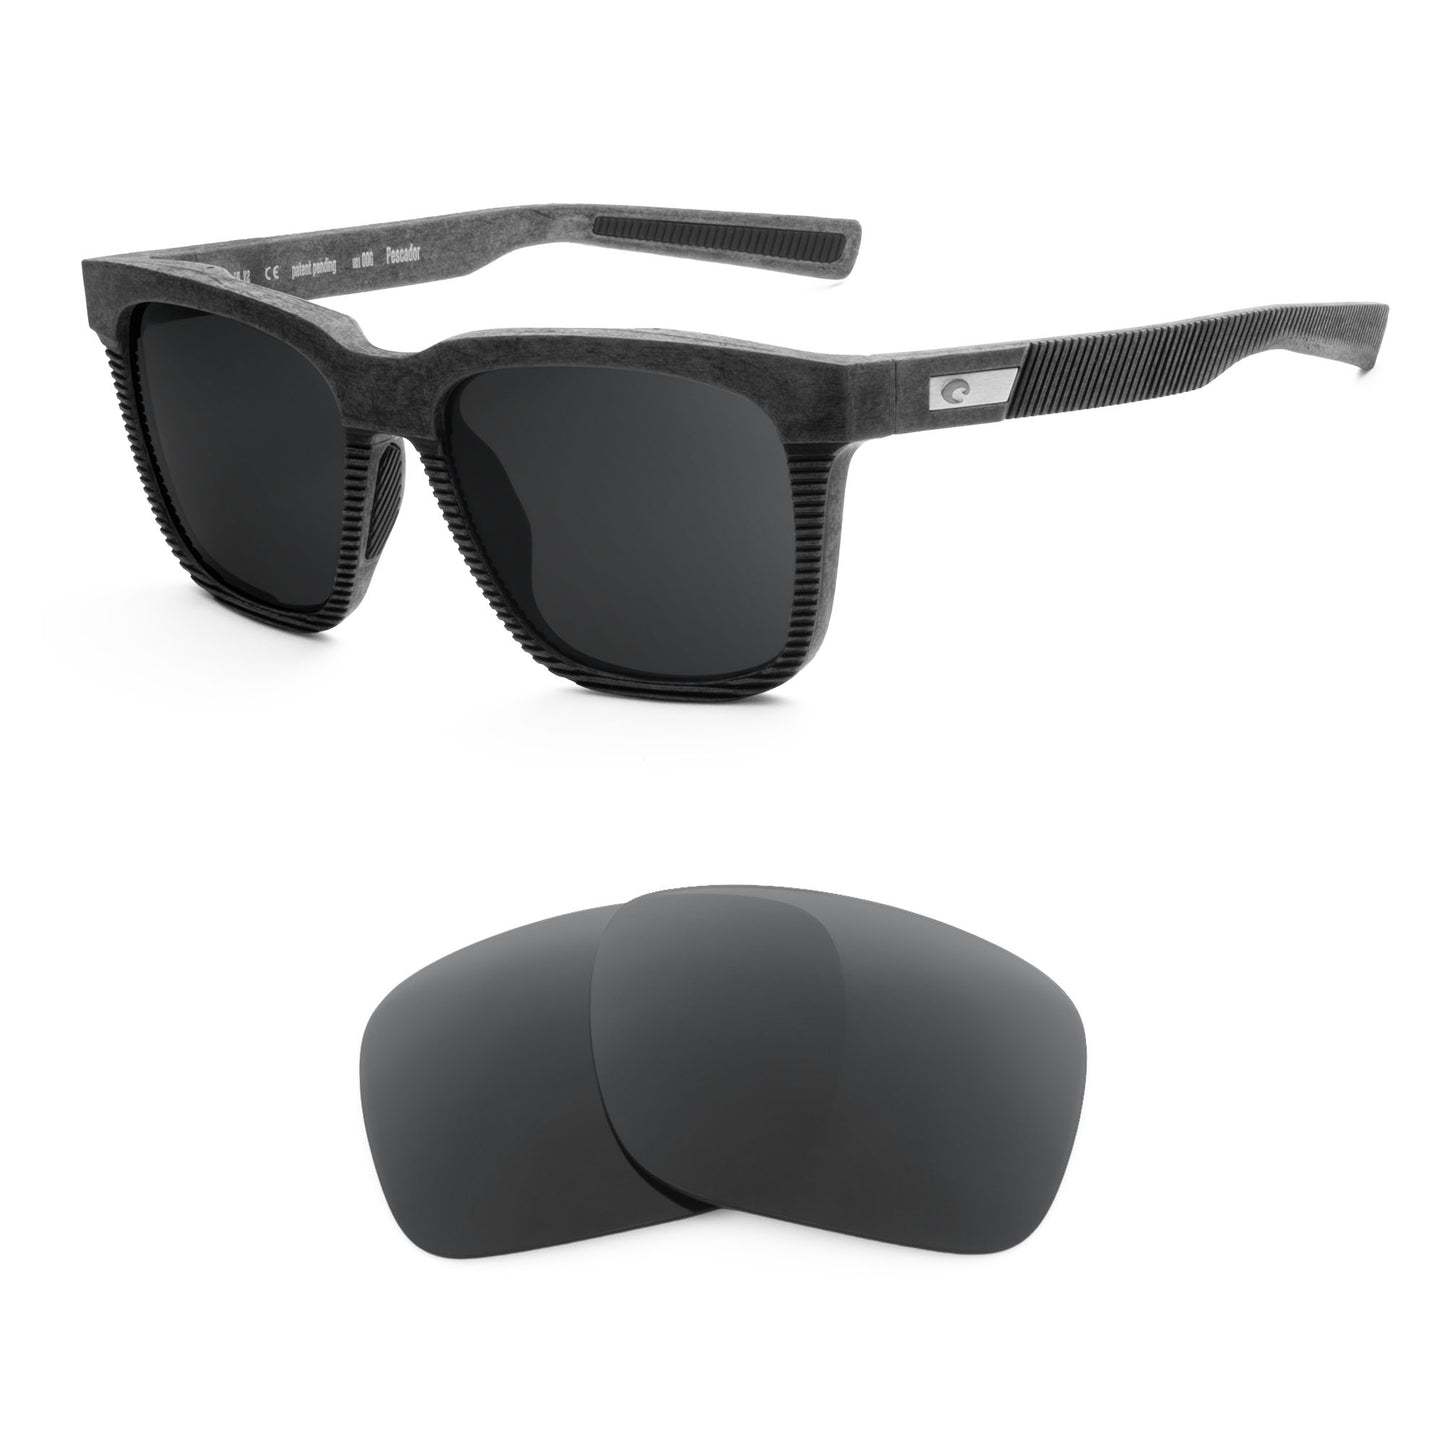 Costa Pescador sunglasses with replacement lenses